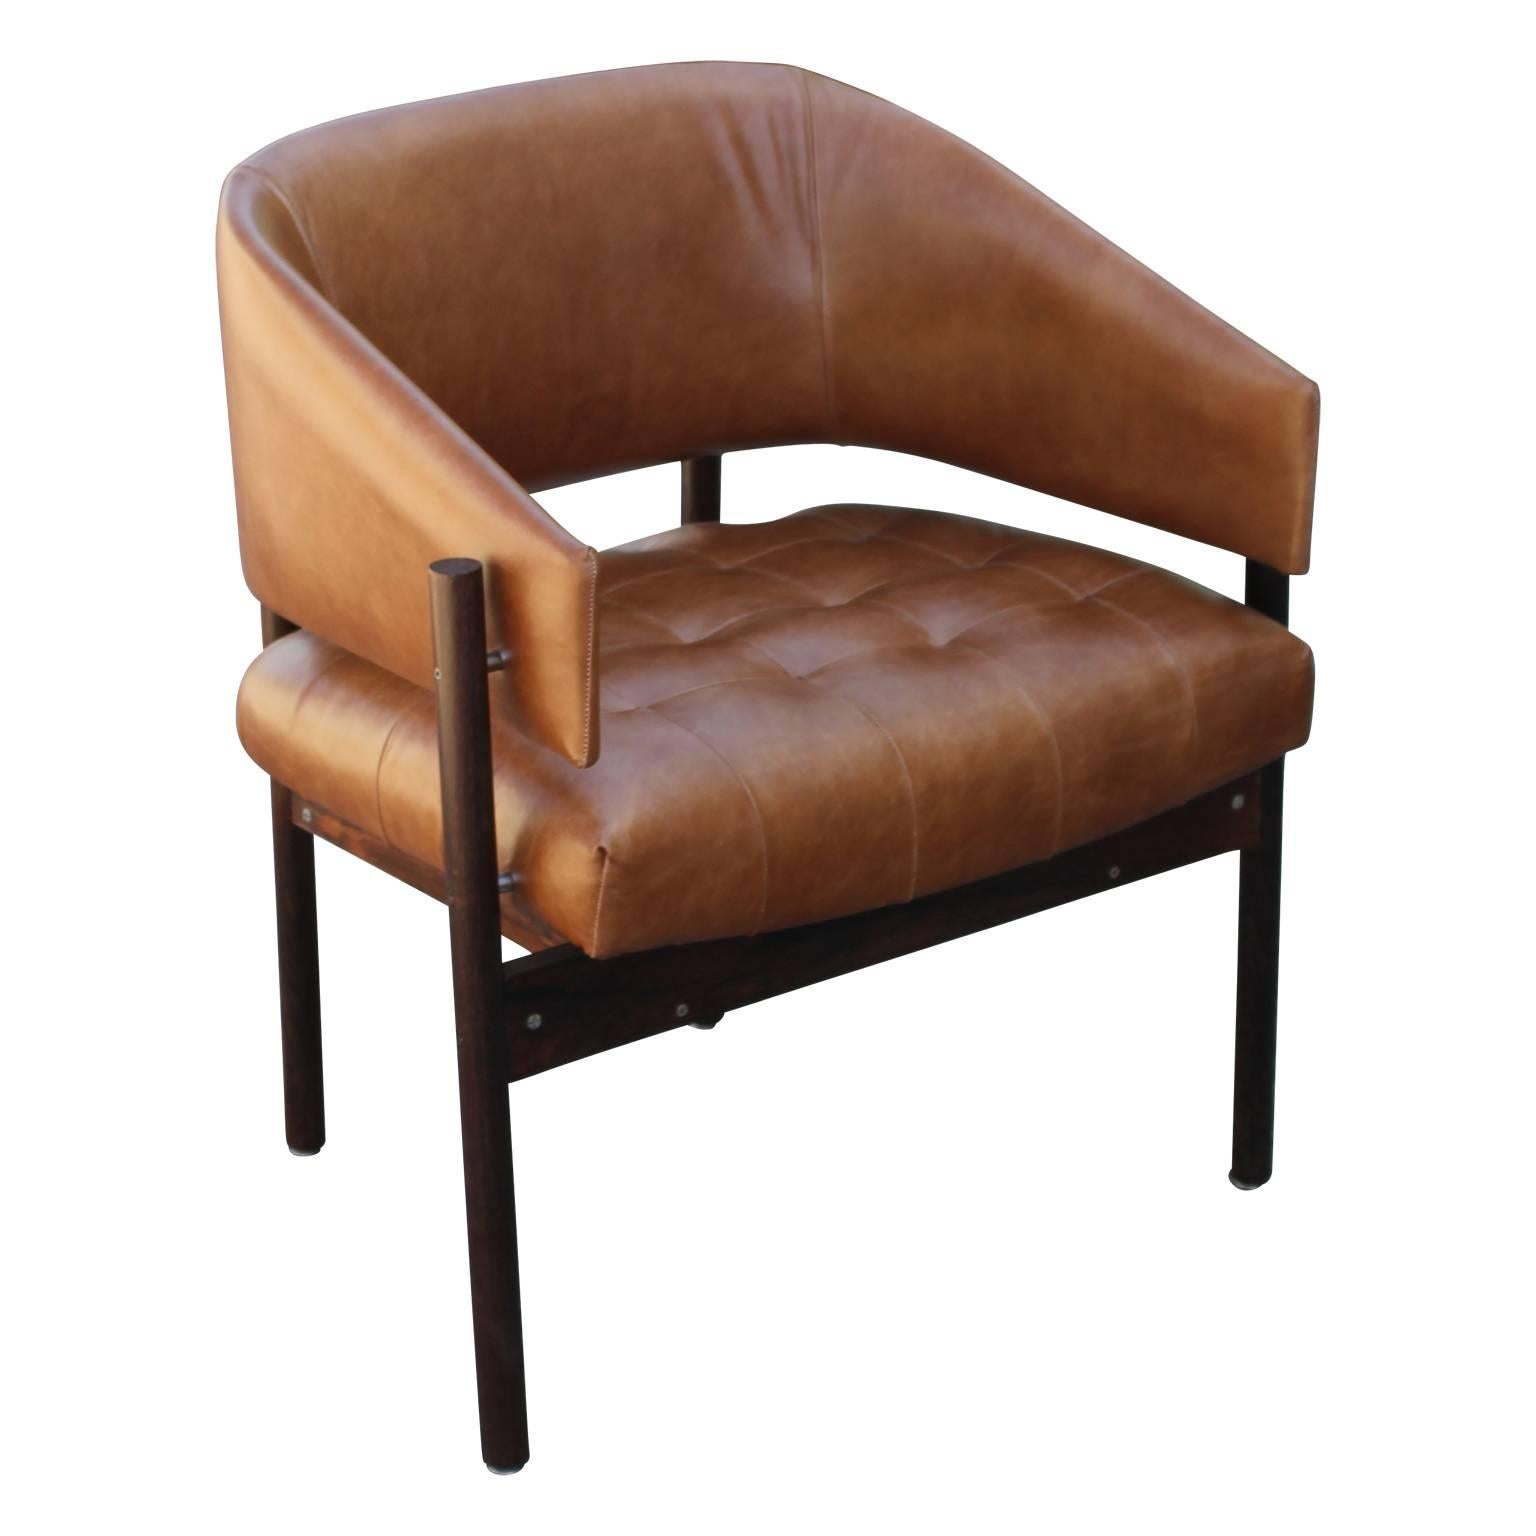 Pair of gorgeous modern light brown leather and rosewood 'Senior' lounge chairs by Jorge Zalszupin for L'Atelier.